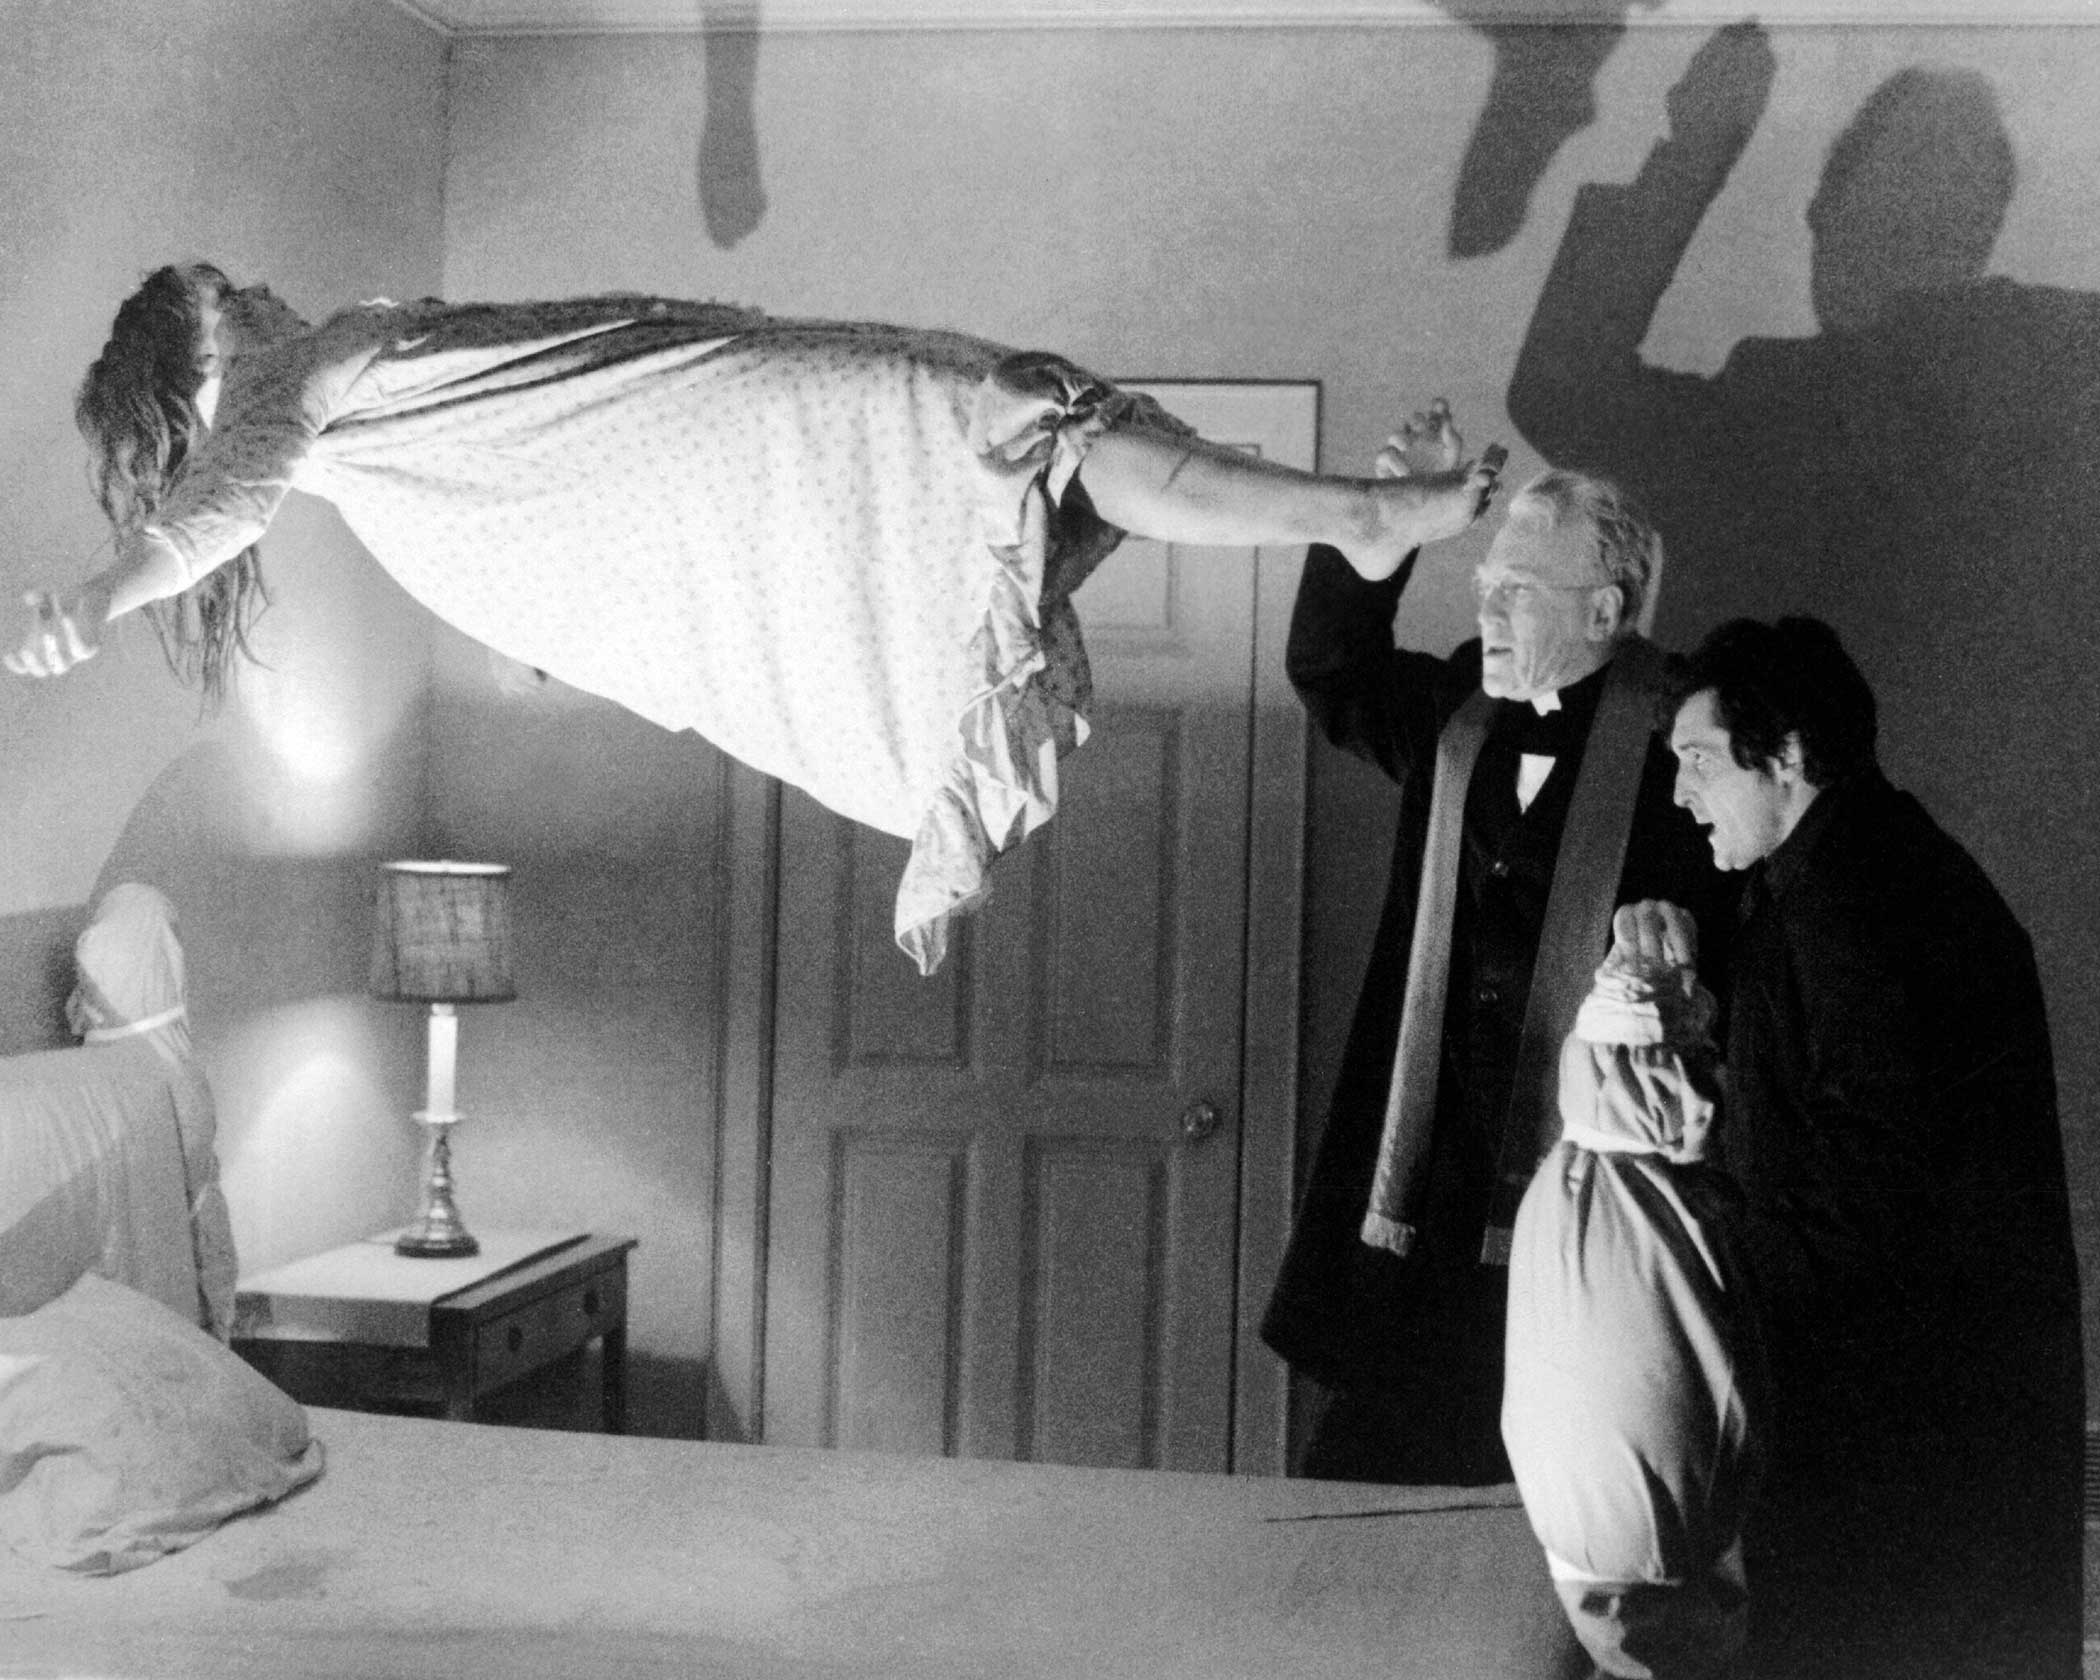 The Exorcist, 1973Parts of the film's story were based on an exorcism performed on a Maryland boy, called  Roland Doe,  in 1949. A Jesuit priest, Fr. William S. Bowdern—assisted by Fr. Walter Halloran—were called in by the boy's family, because they thought his erratic and aggressive behavior was caused by demonic possession.